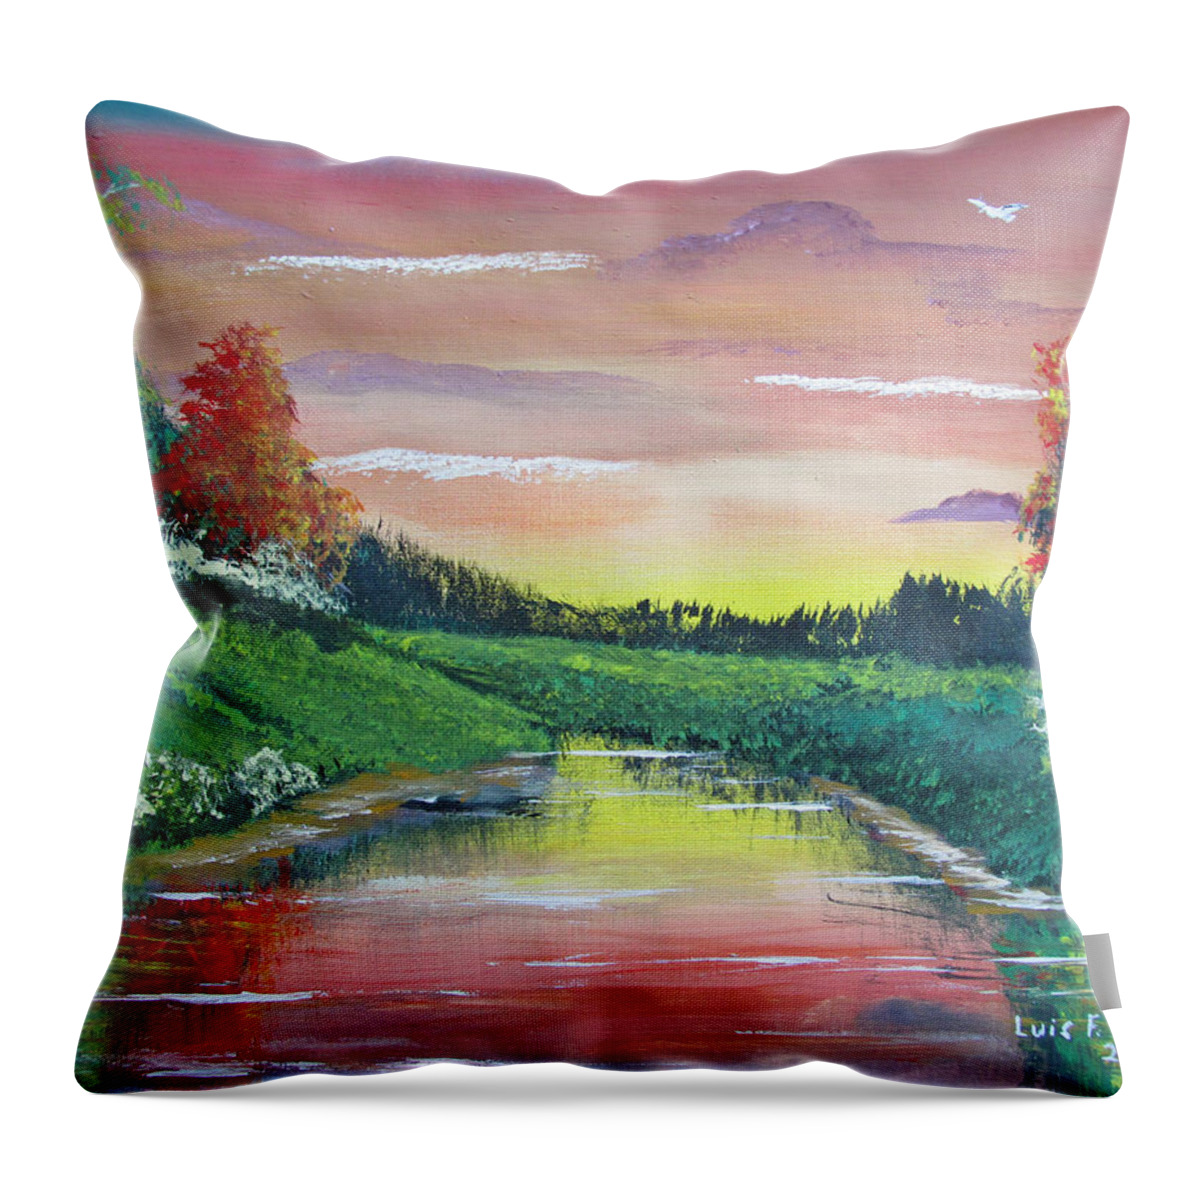 Sunset Throw Pillow featuring the painting Calming Sunset by Luis F Rodriguez